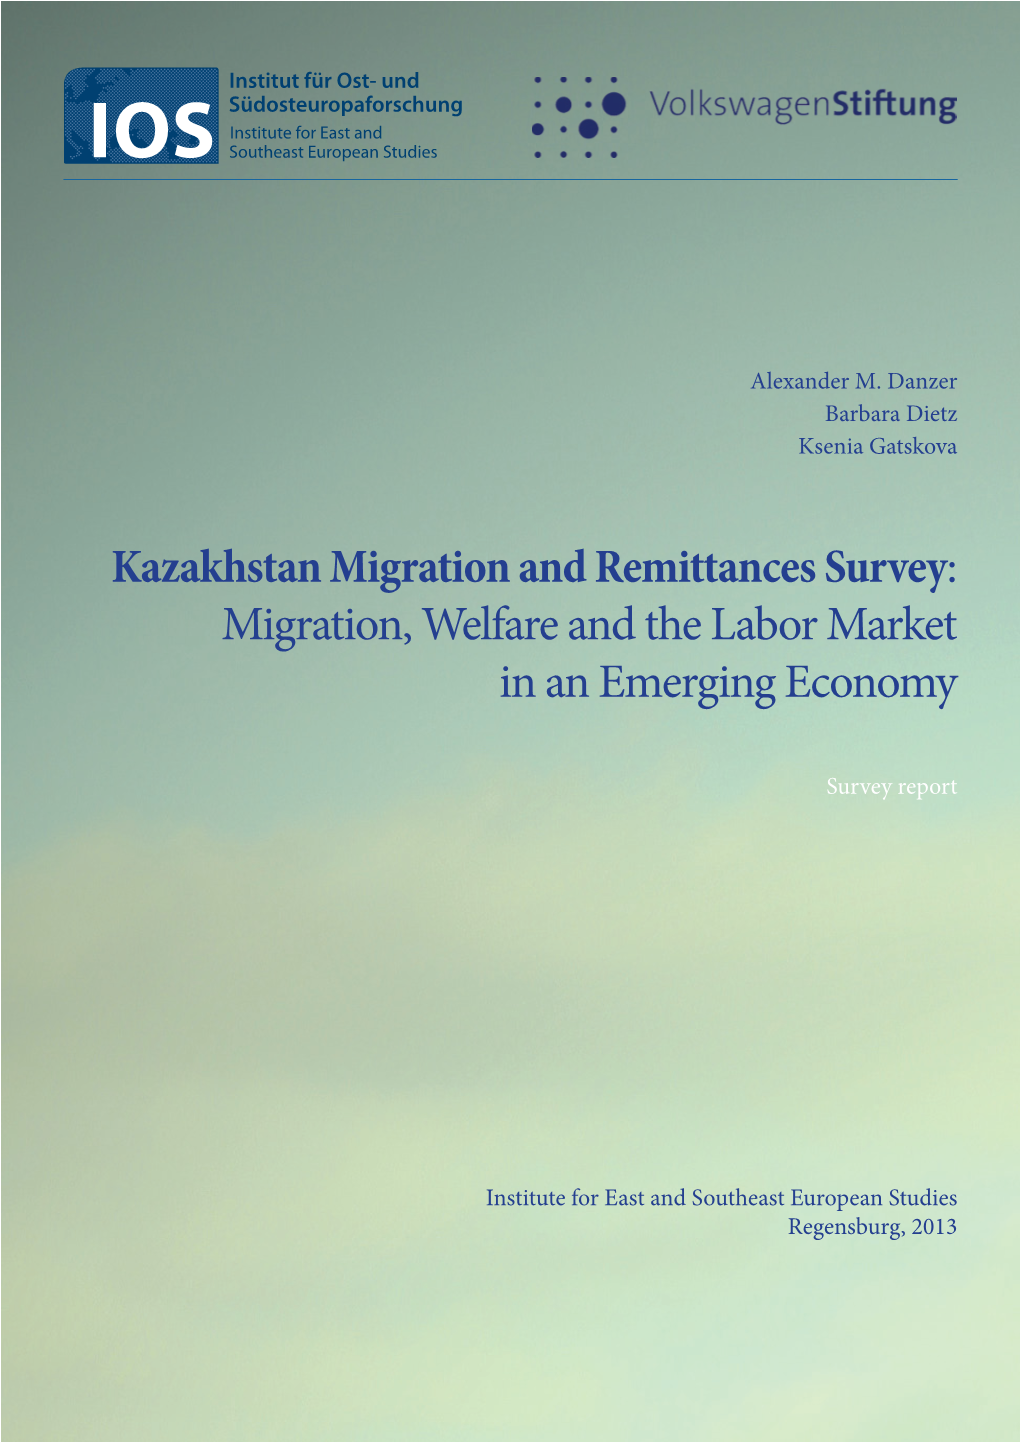 Kazakhstan Migration and Remittances Survey: Migration, Welfare and the Labor Market in an Emerging Economy